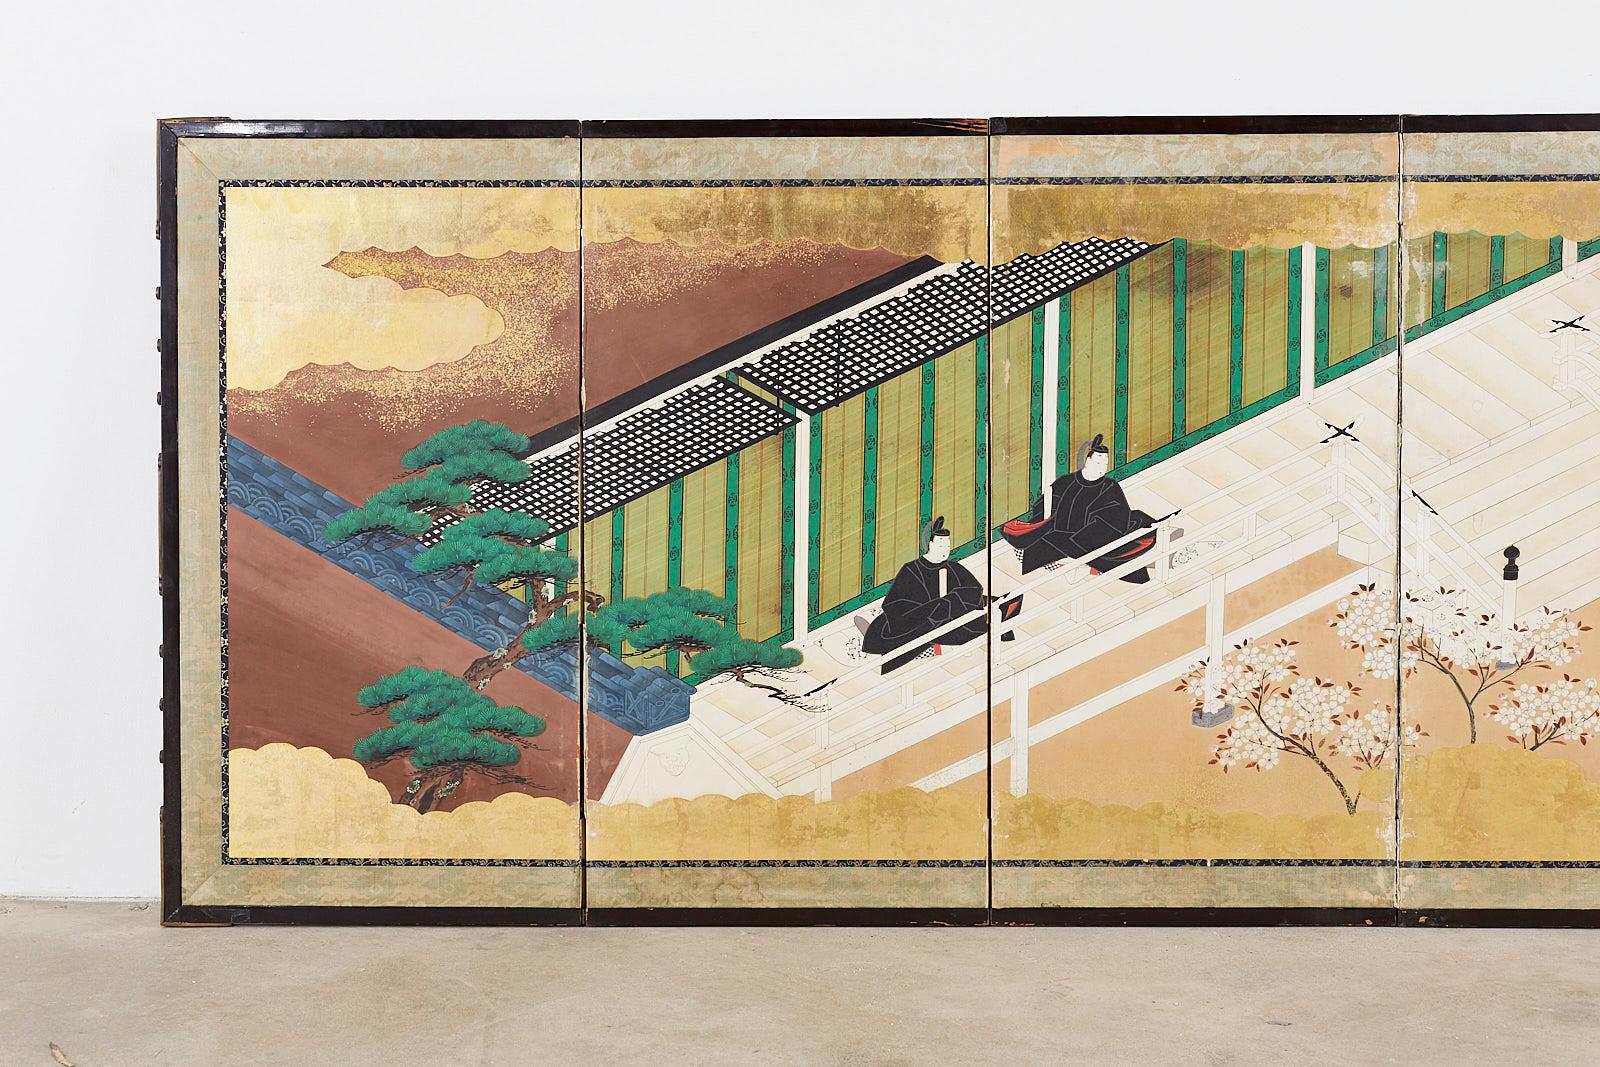 Stunning Japanese late Meiji, early Taisho period eight-panel screen. Chapter 24 Kocho butterflies episode. Nihonga school in the Tosa school manner with Kano school landscape elements. Miniature style 27 inches high ink, color and gold on paper.